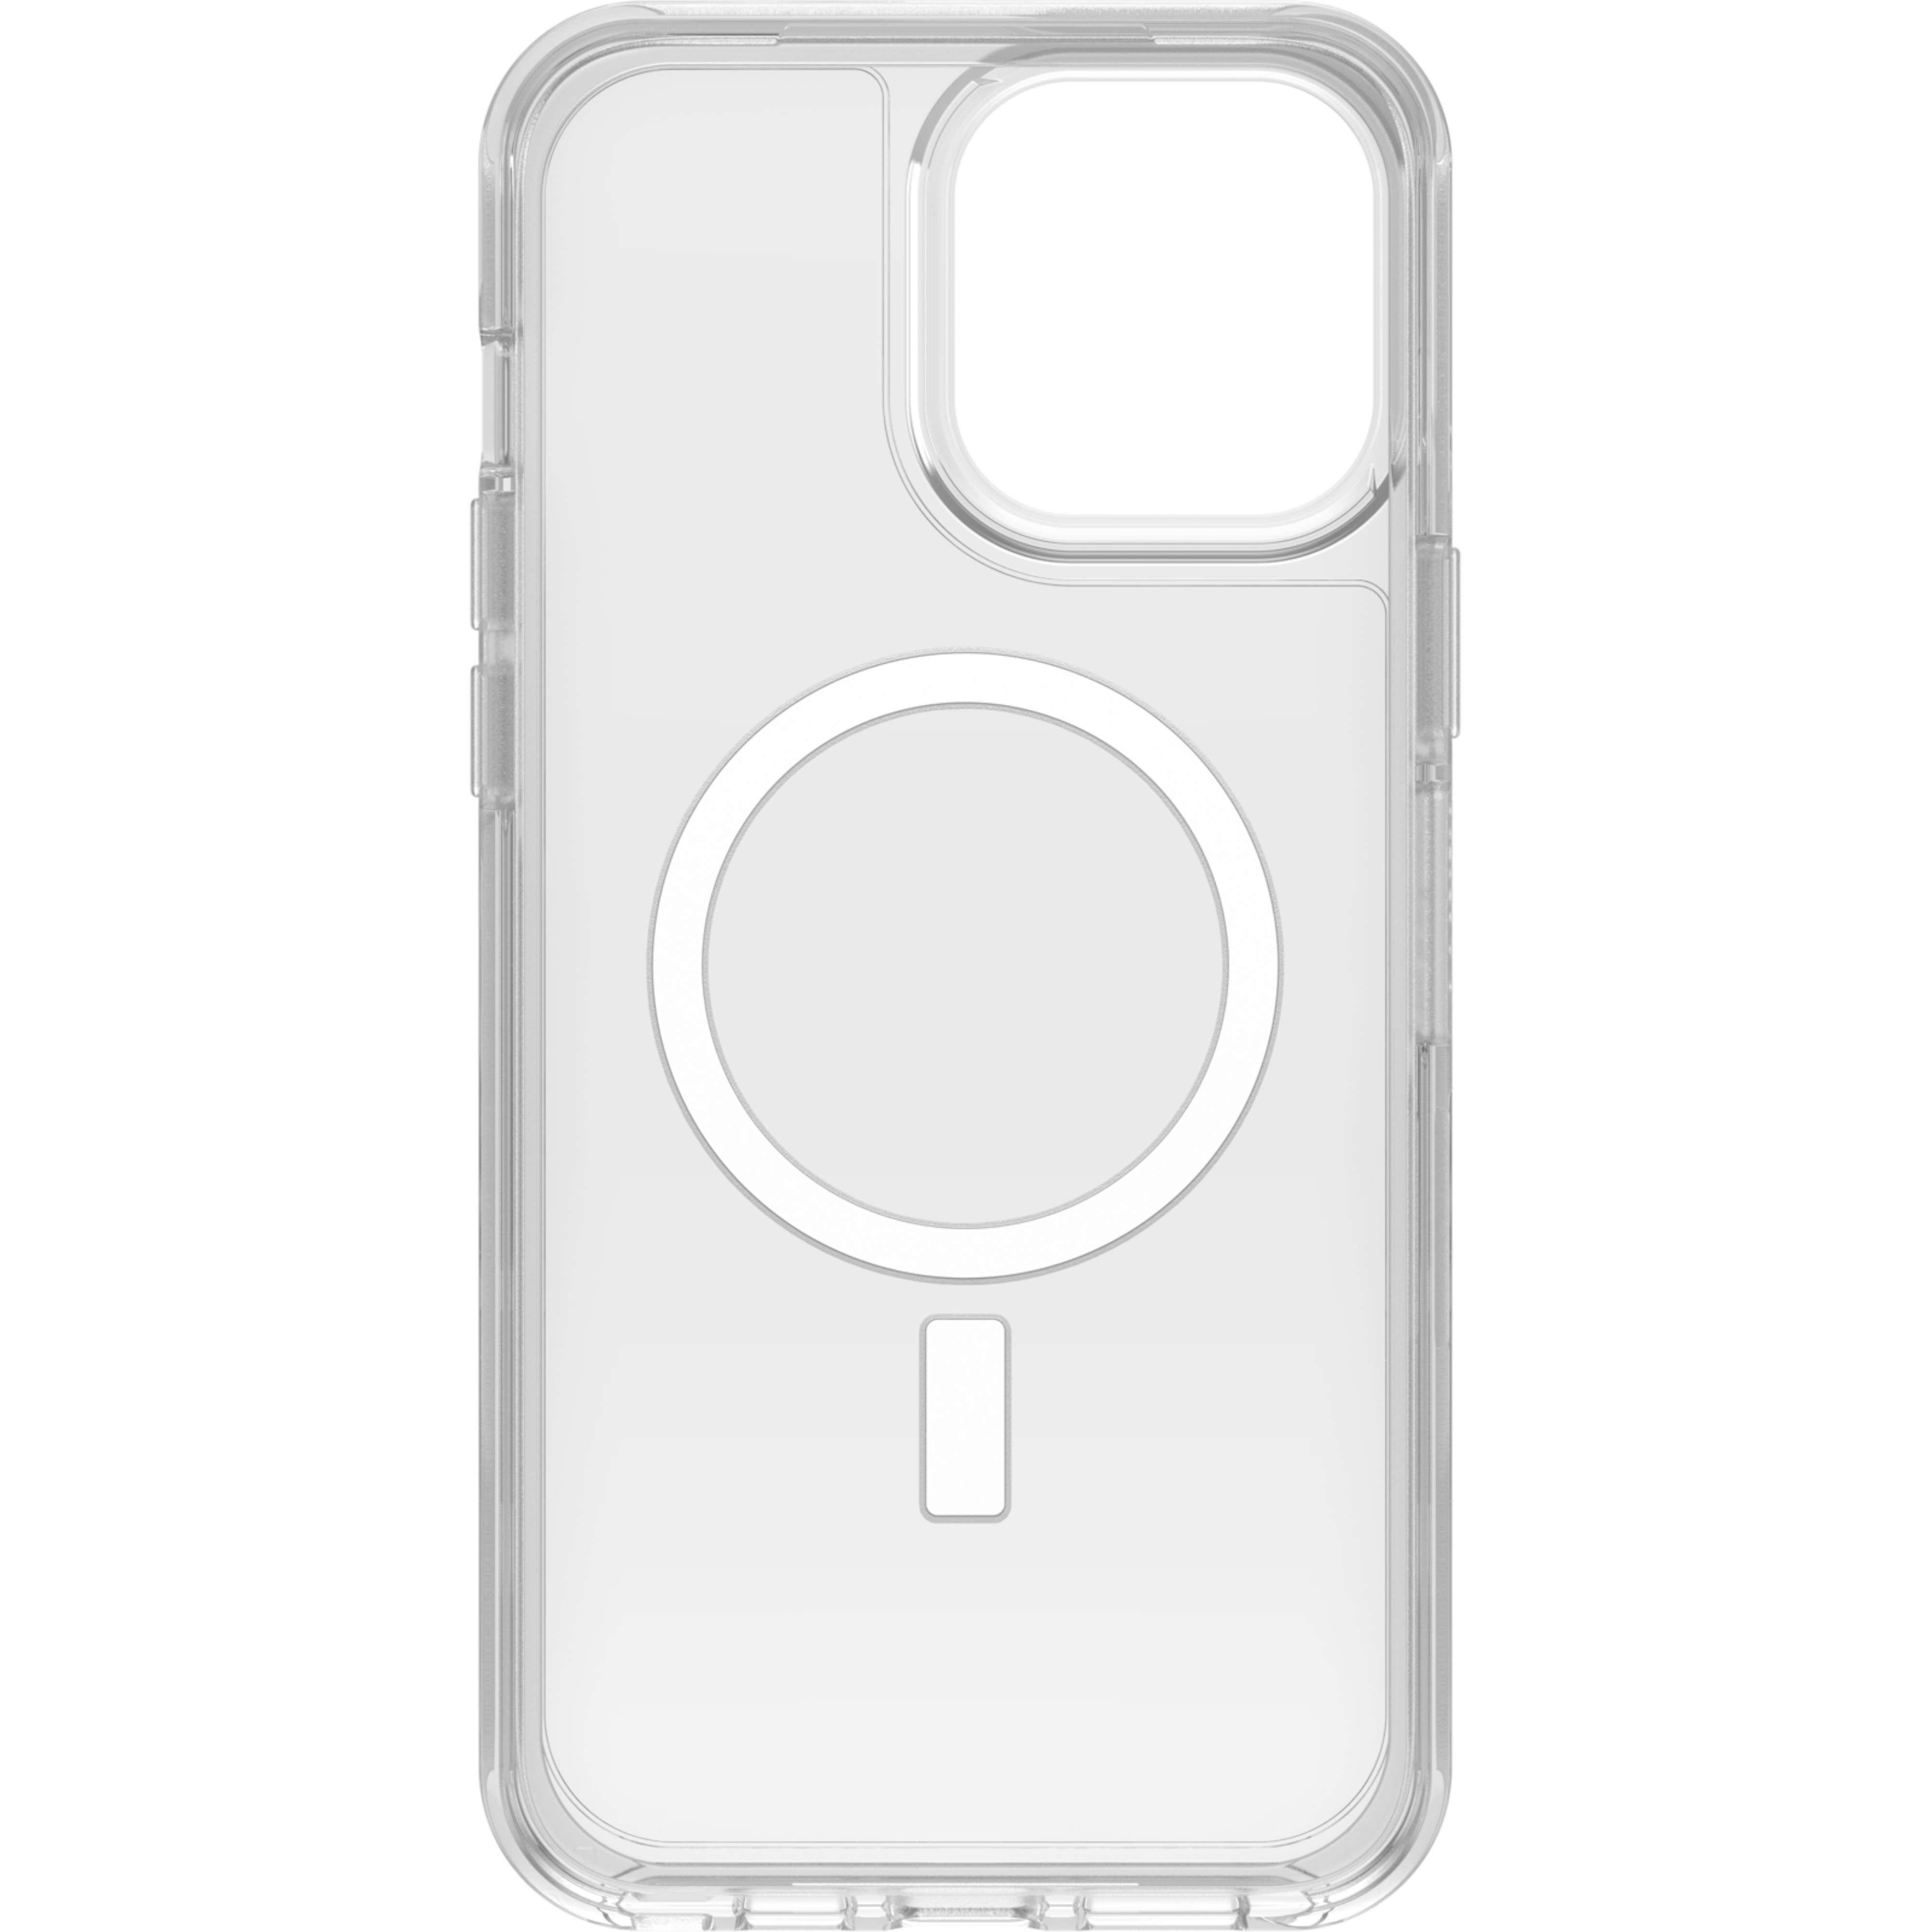 Pro 13 Max, Backcover, Symmetry, OTTERBOX iPhone Apple, Transparent